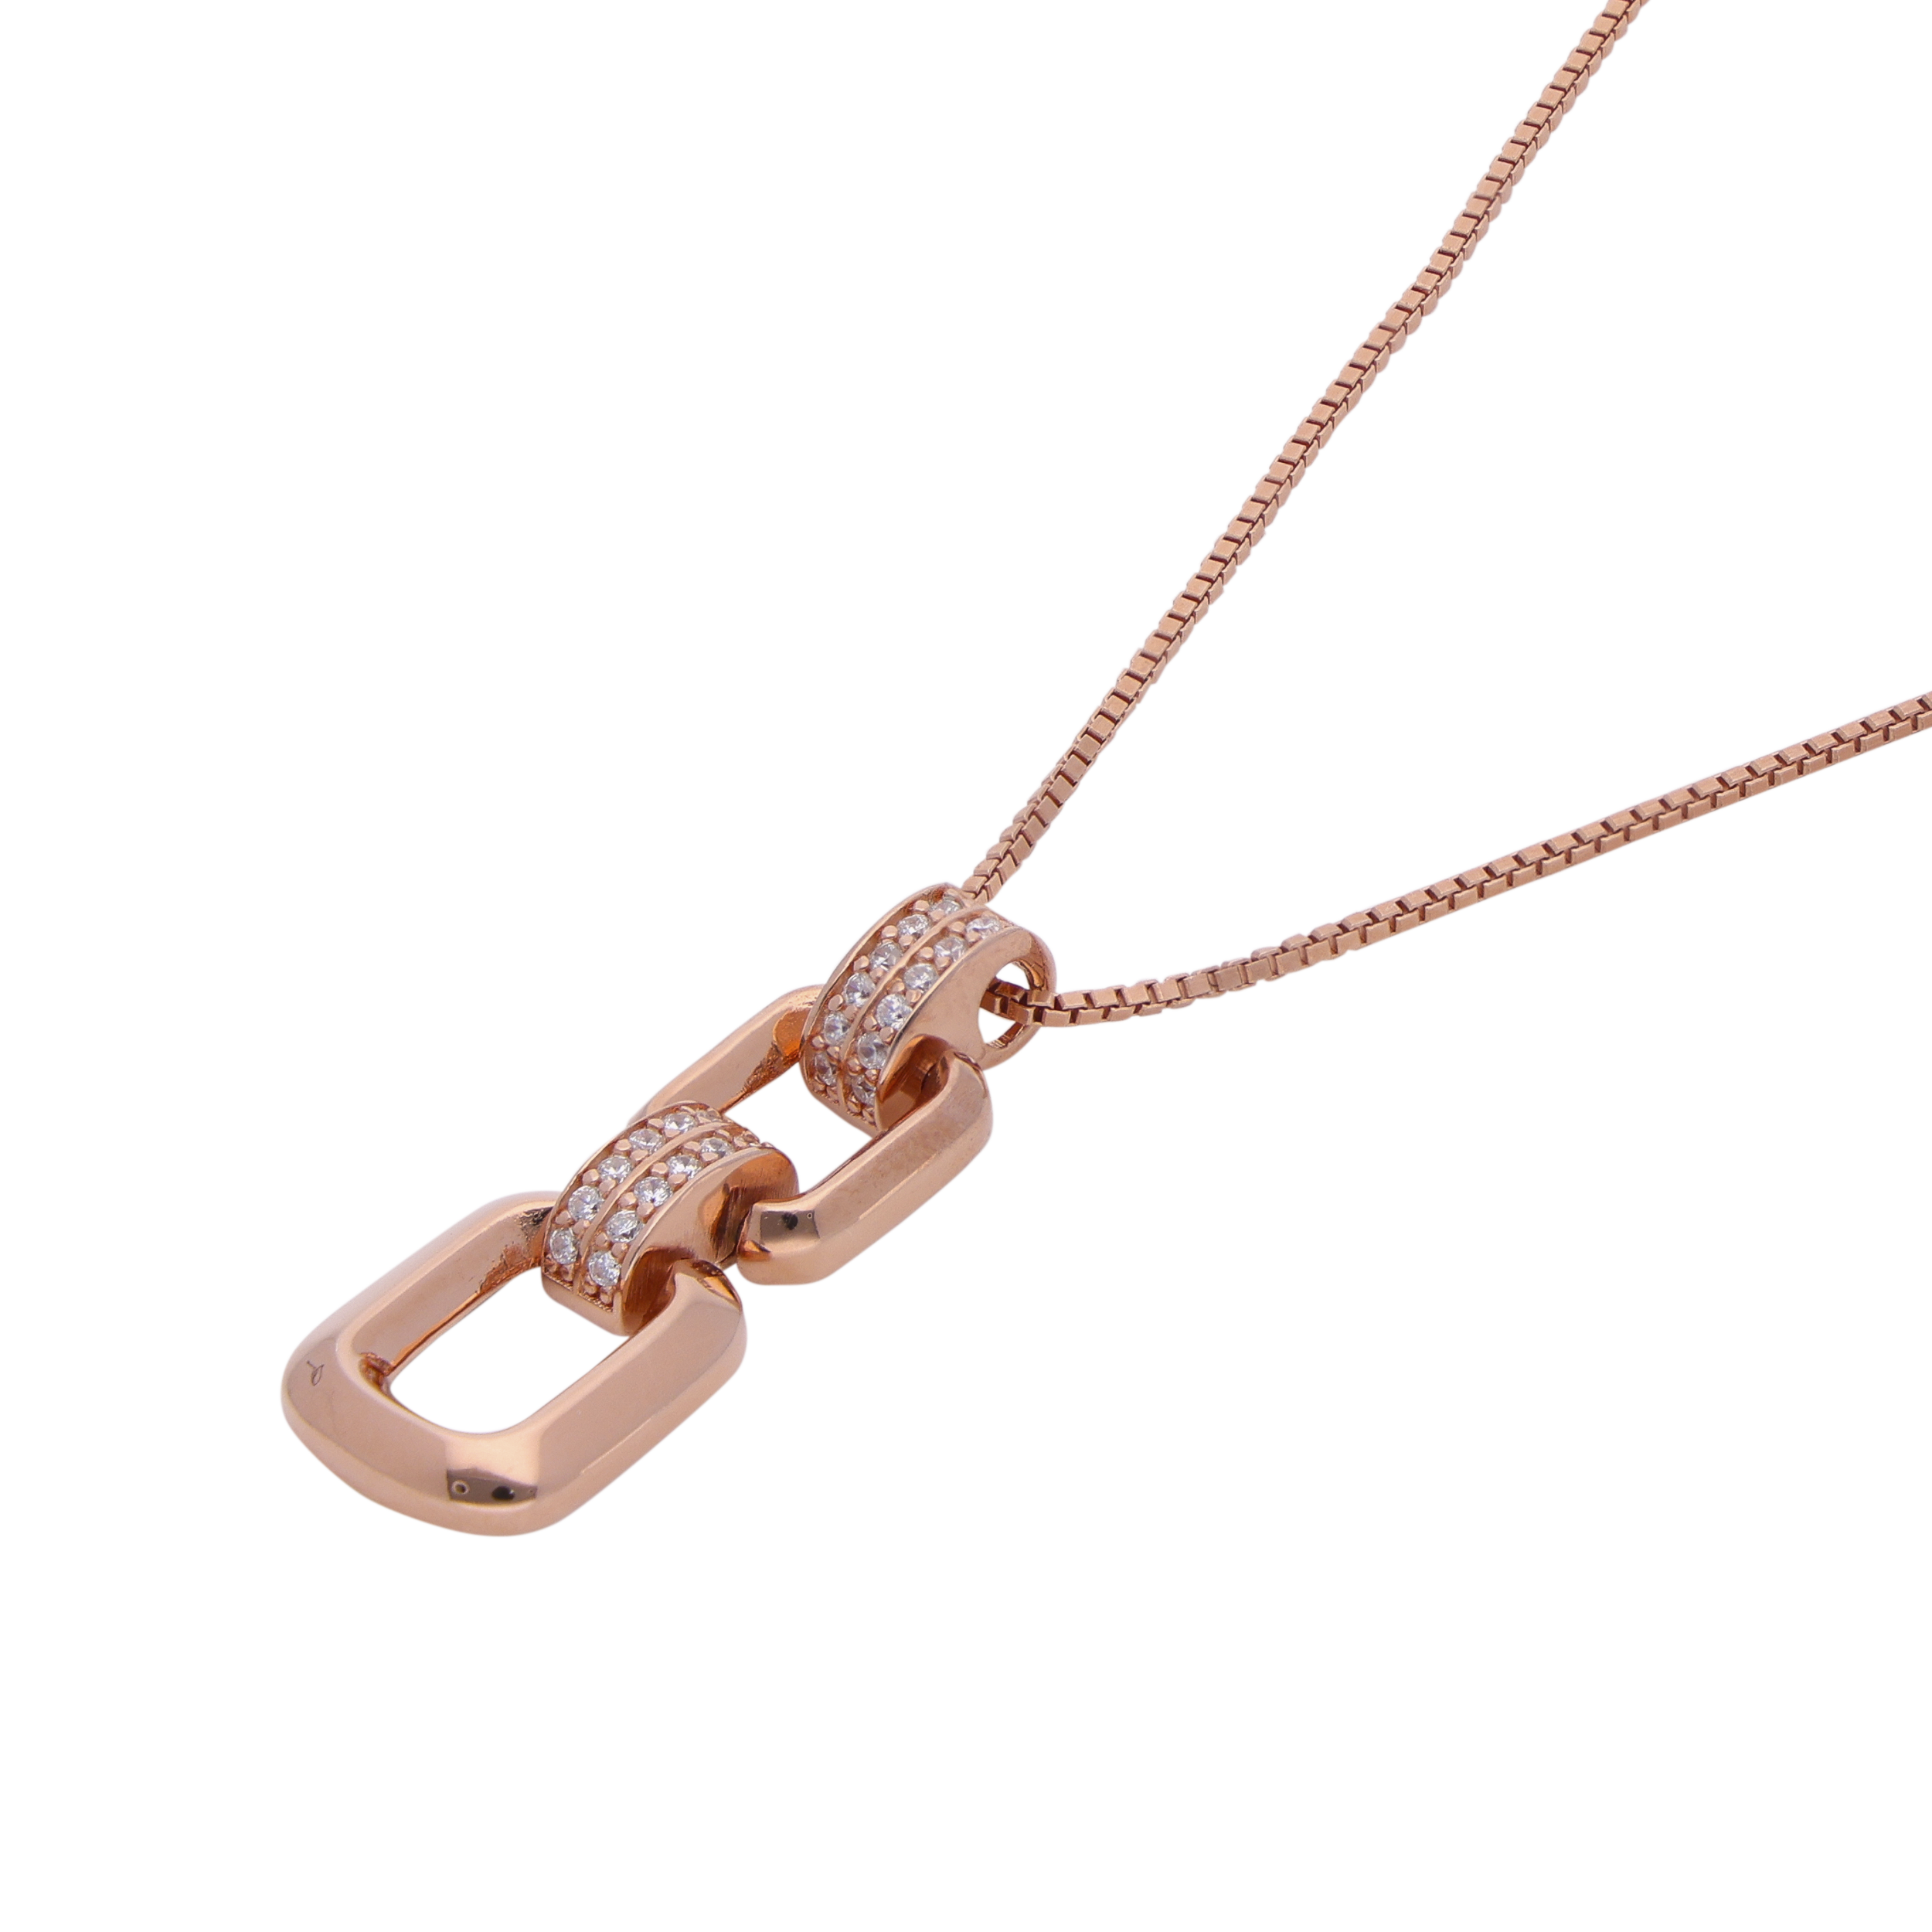 Radiant Rose Gold Interlinked Rectangle Pendant with Cubic Zirconia Accents | SKU : 0019889054, 0019889078